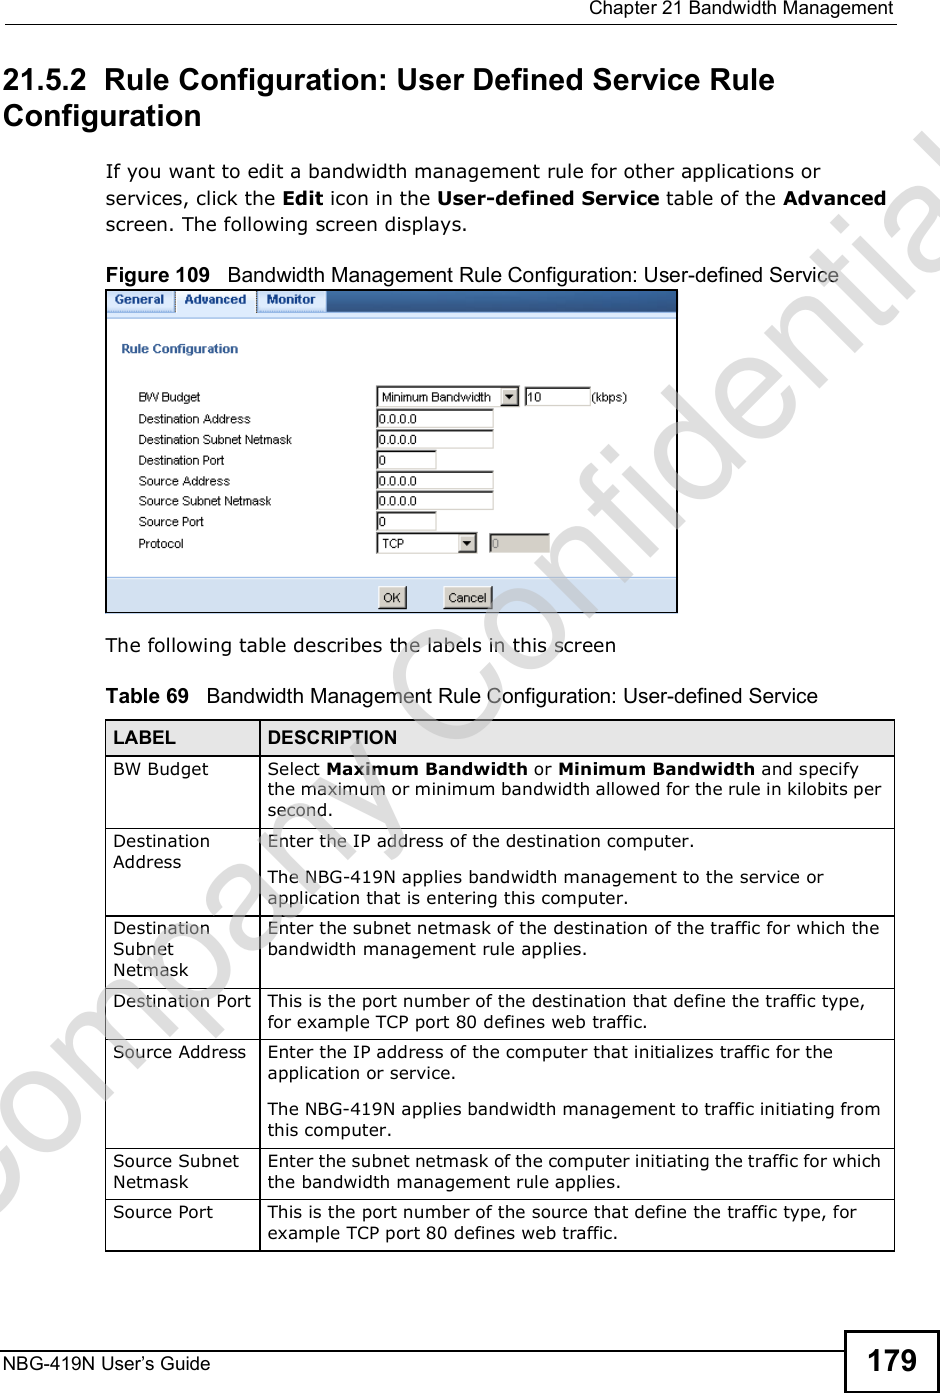  Chapter 21Bandwidth ManagementNBG-419N User s Guide 17921.5.2  Rule Configuration: User Defined Service Rule Configuration    If you want to edit a bandwidth management rule for other applications or services, click the Edit icon in the User-defined Service table of the Advanced screen. The following screen displays.Figure 109   Bandwidth Management Rule Configuration: User-defined Service The following table describes the labels in this screenTable 69   Bandwidth Management Rule Configuration: User-defined Service  LABEL DESCRIPTIONBW Budget Select Maximum Bandwidth or Minimum Bandwidth and specify the maximum or minimum bandwidth allowed for the rule in kilobits per second.  Destination AddressEnter the IP address of the destination computer.The NBG-419N applies bandwidth management to the service or application that is entering this computer. Destination Subnet NetmaskEnter the subnet netmask of the destination of the traffic for which the bandwidth management rule applies.Destination Port This is the port number of the destination that define the traffic type, for example TCP port 80 defines web traffic.Source Address Enter the IP address of the computer that initializes traffic for the application or service. The NBG-419N applies bandwidth management to traffic initiating from this computer. Source Subnet NetmaskEnter the subnet netmask of the computer initiating the traffic for which the bandwidth management rule applies.Source Port This is the port number of the source that define the traffic type, for example TCP port 80 defines web traffic.Company Confidential